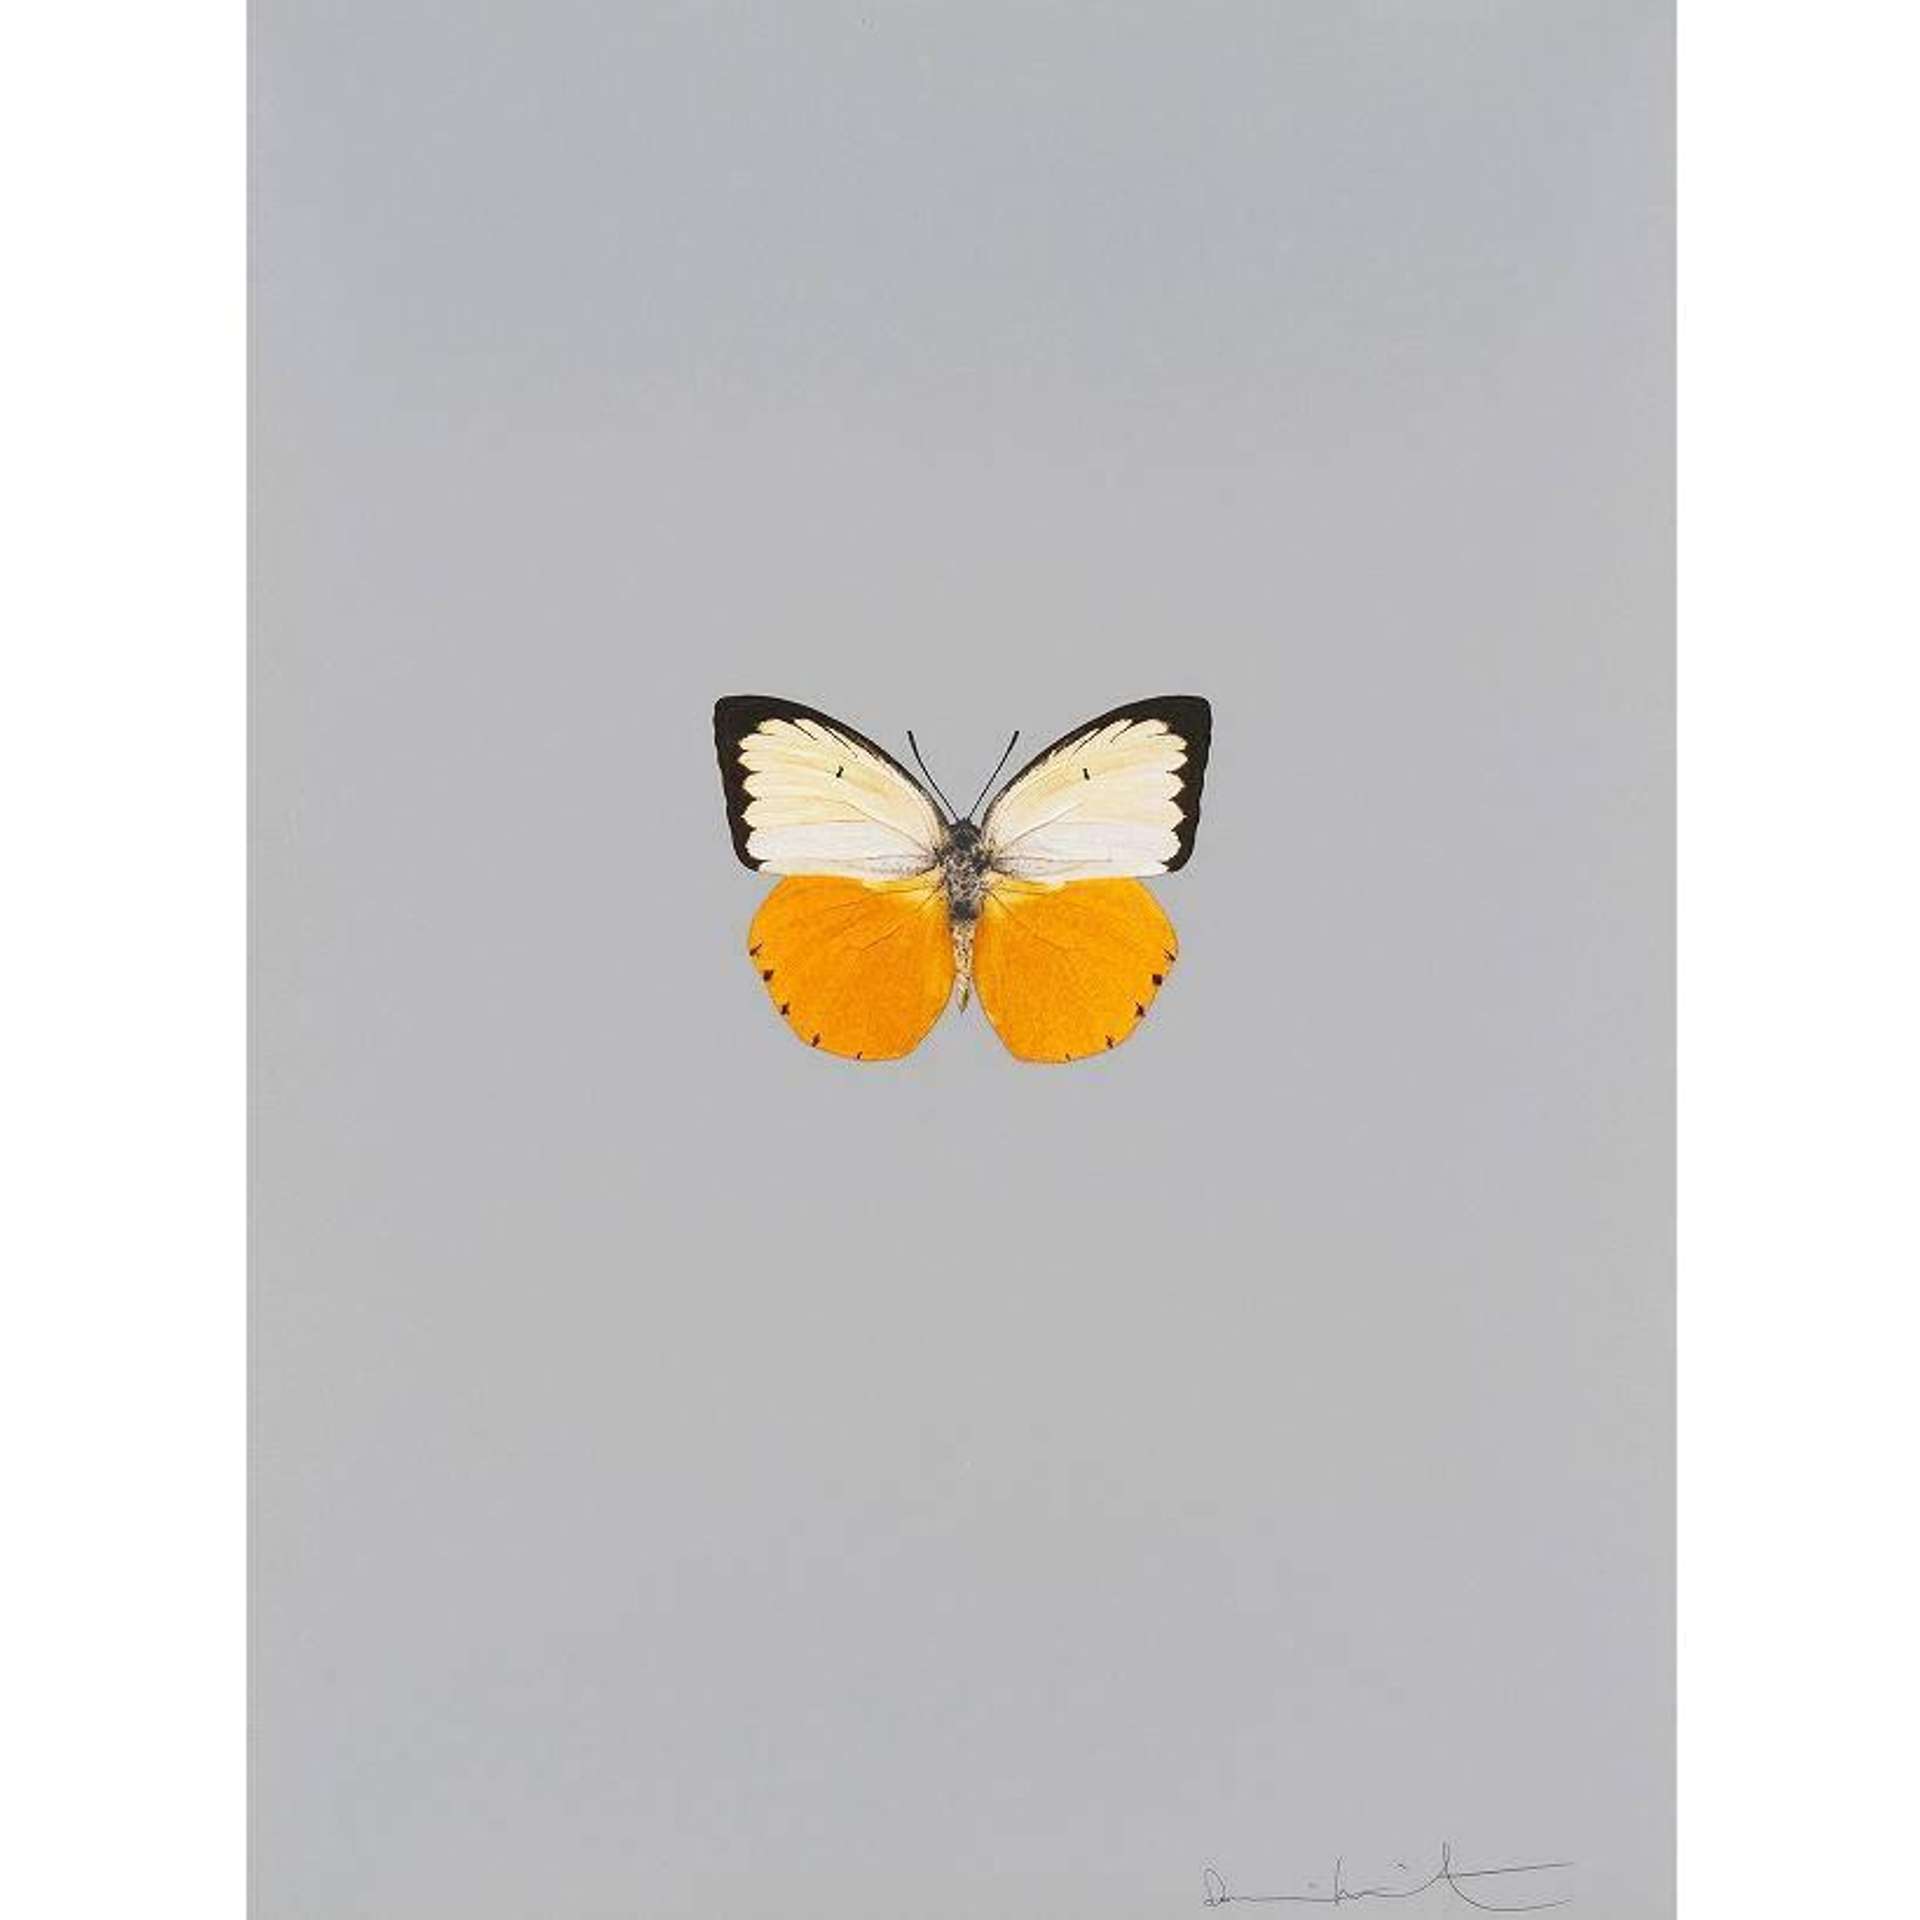 Damien Hirst: It’s A Beautiful Day 4 - Signed Print